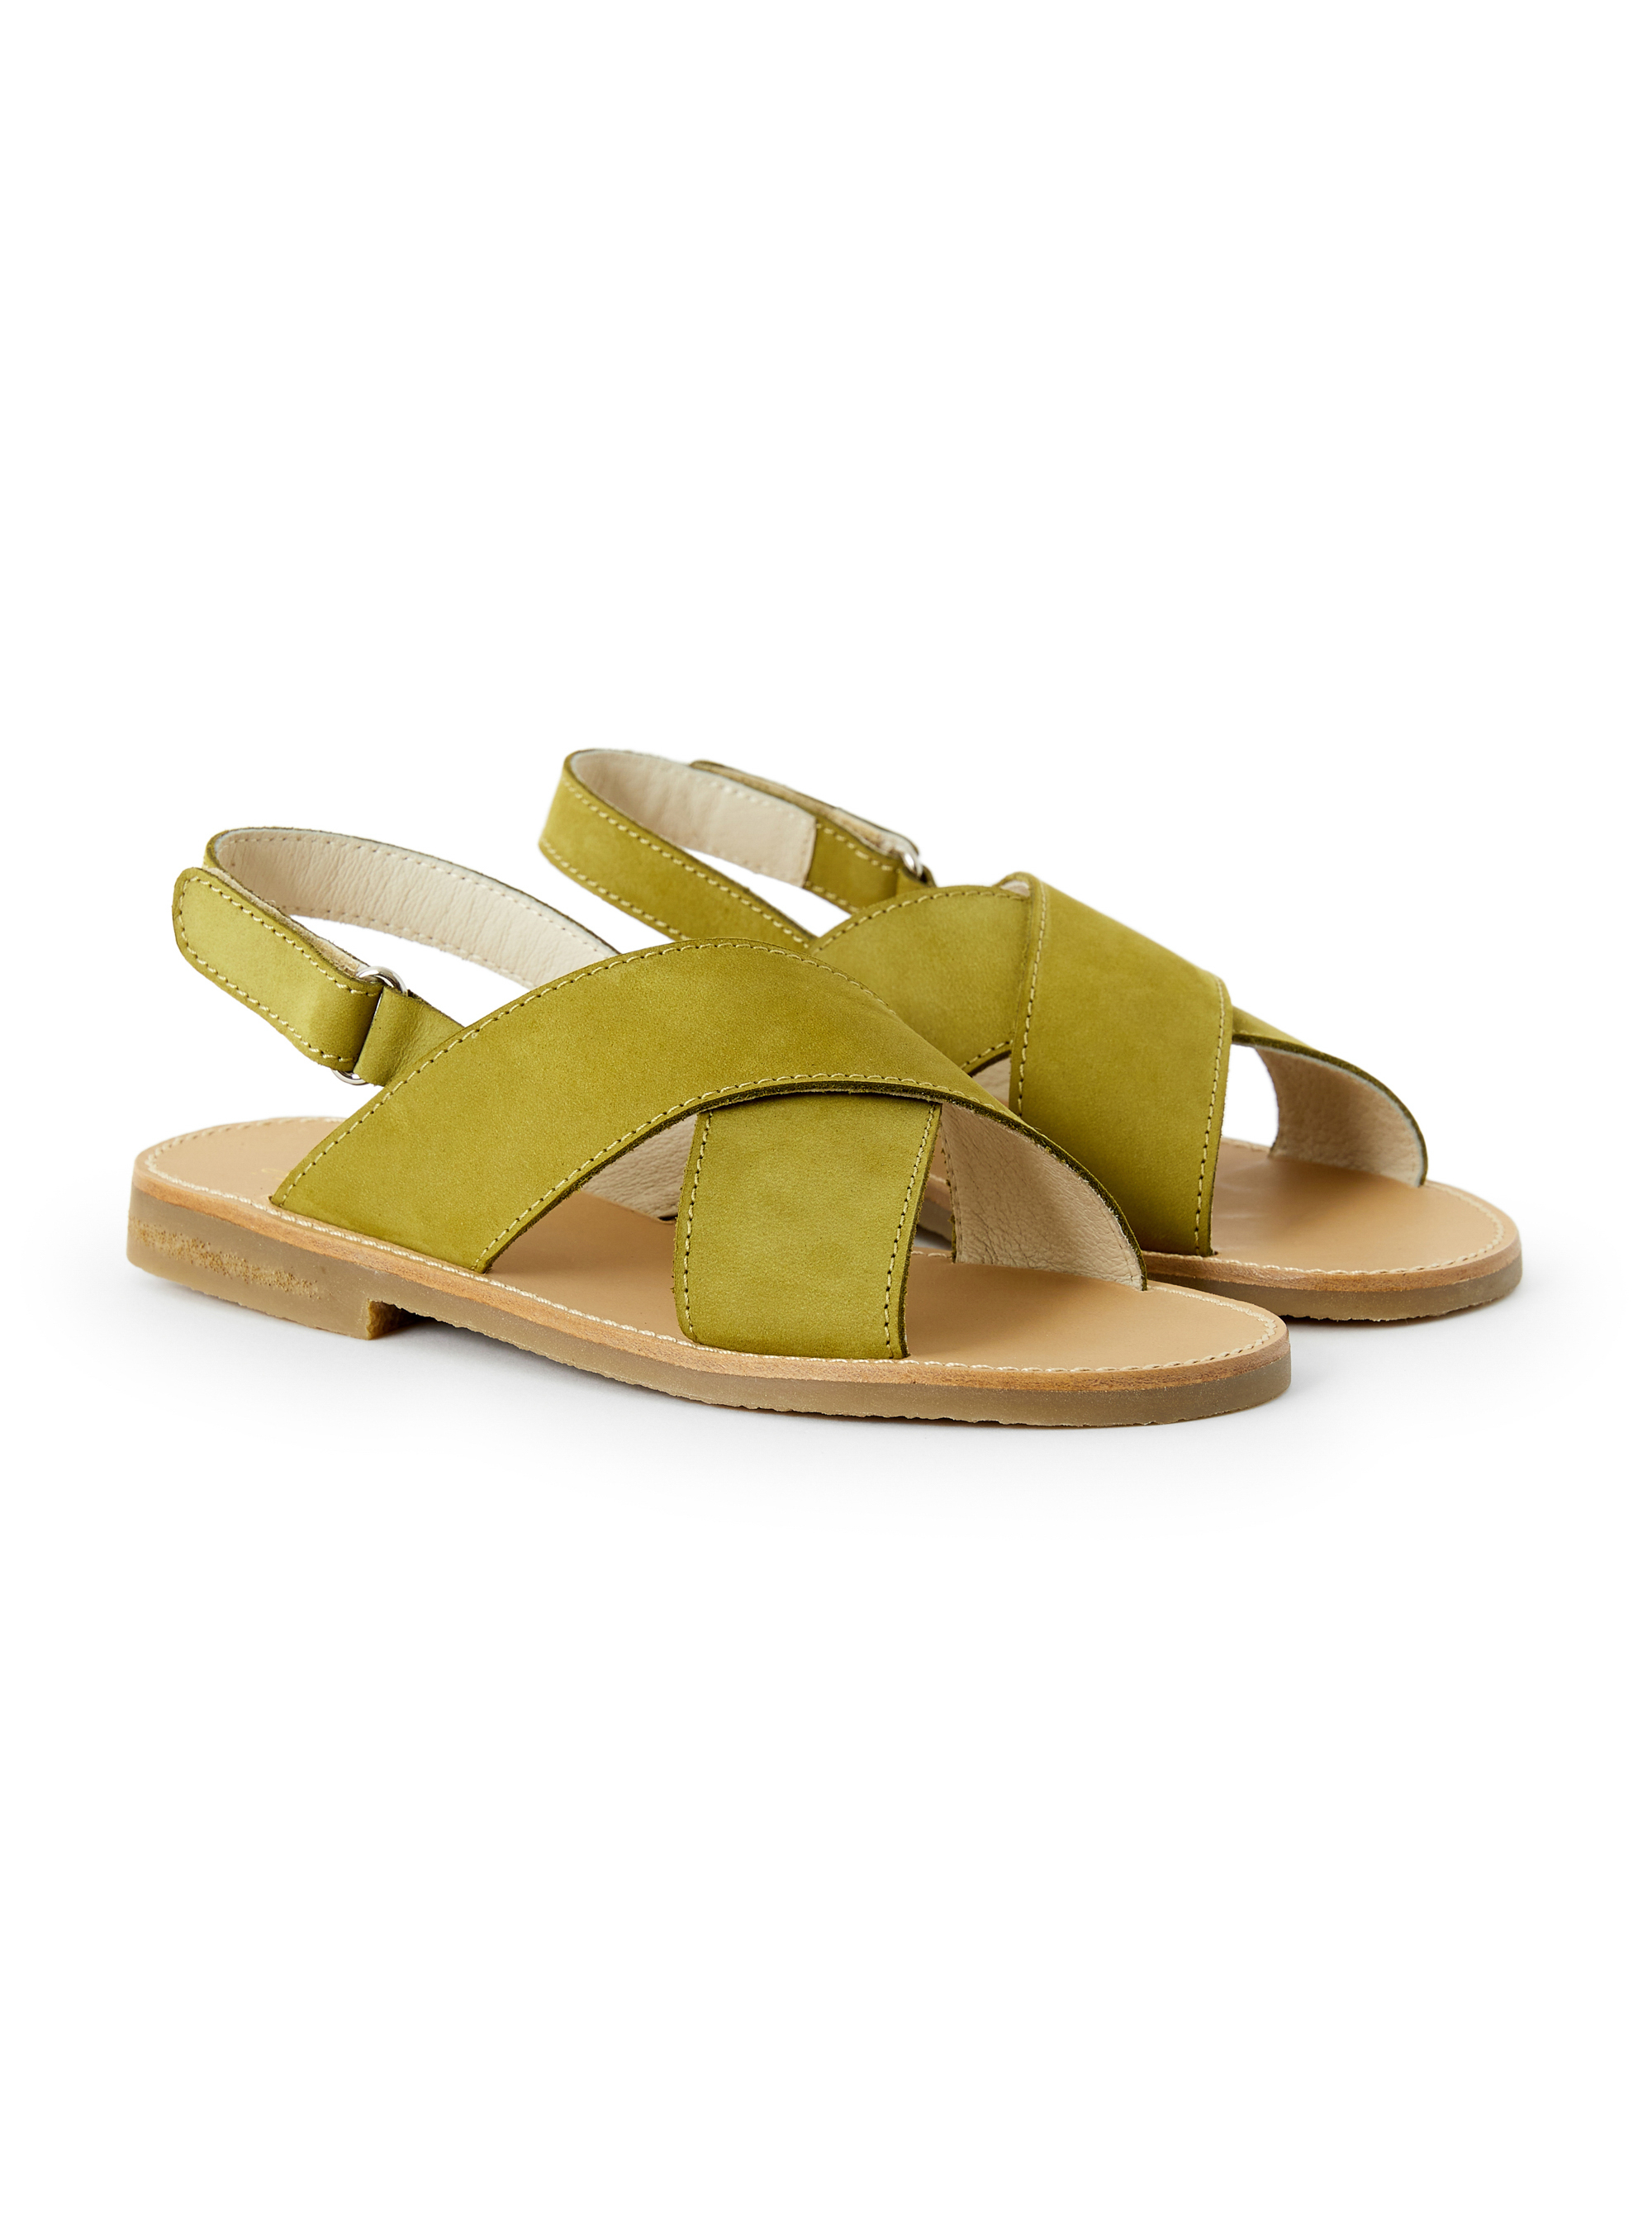 Green sandal with crossed bands - Green | Il Gufo